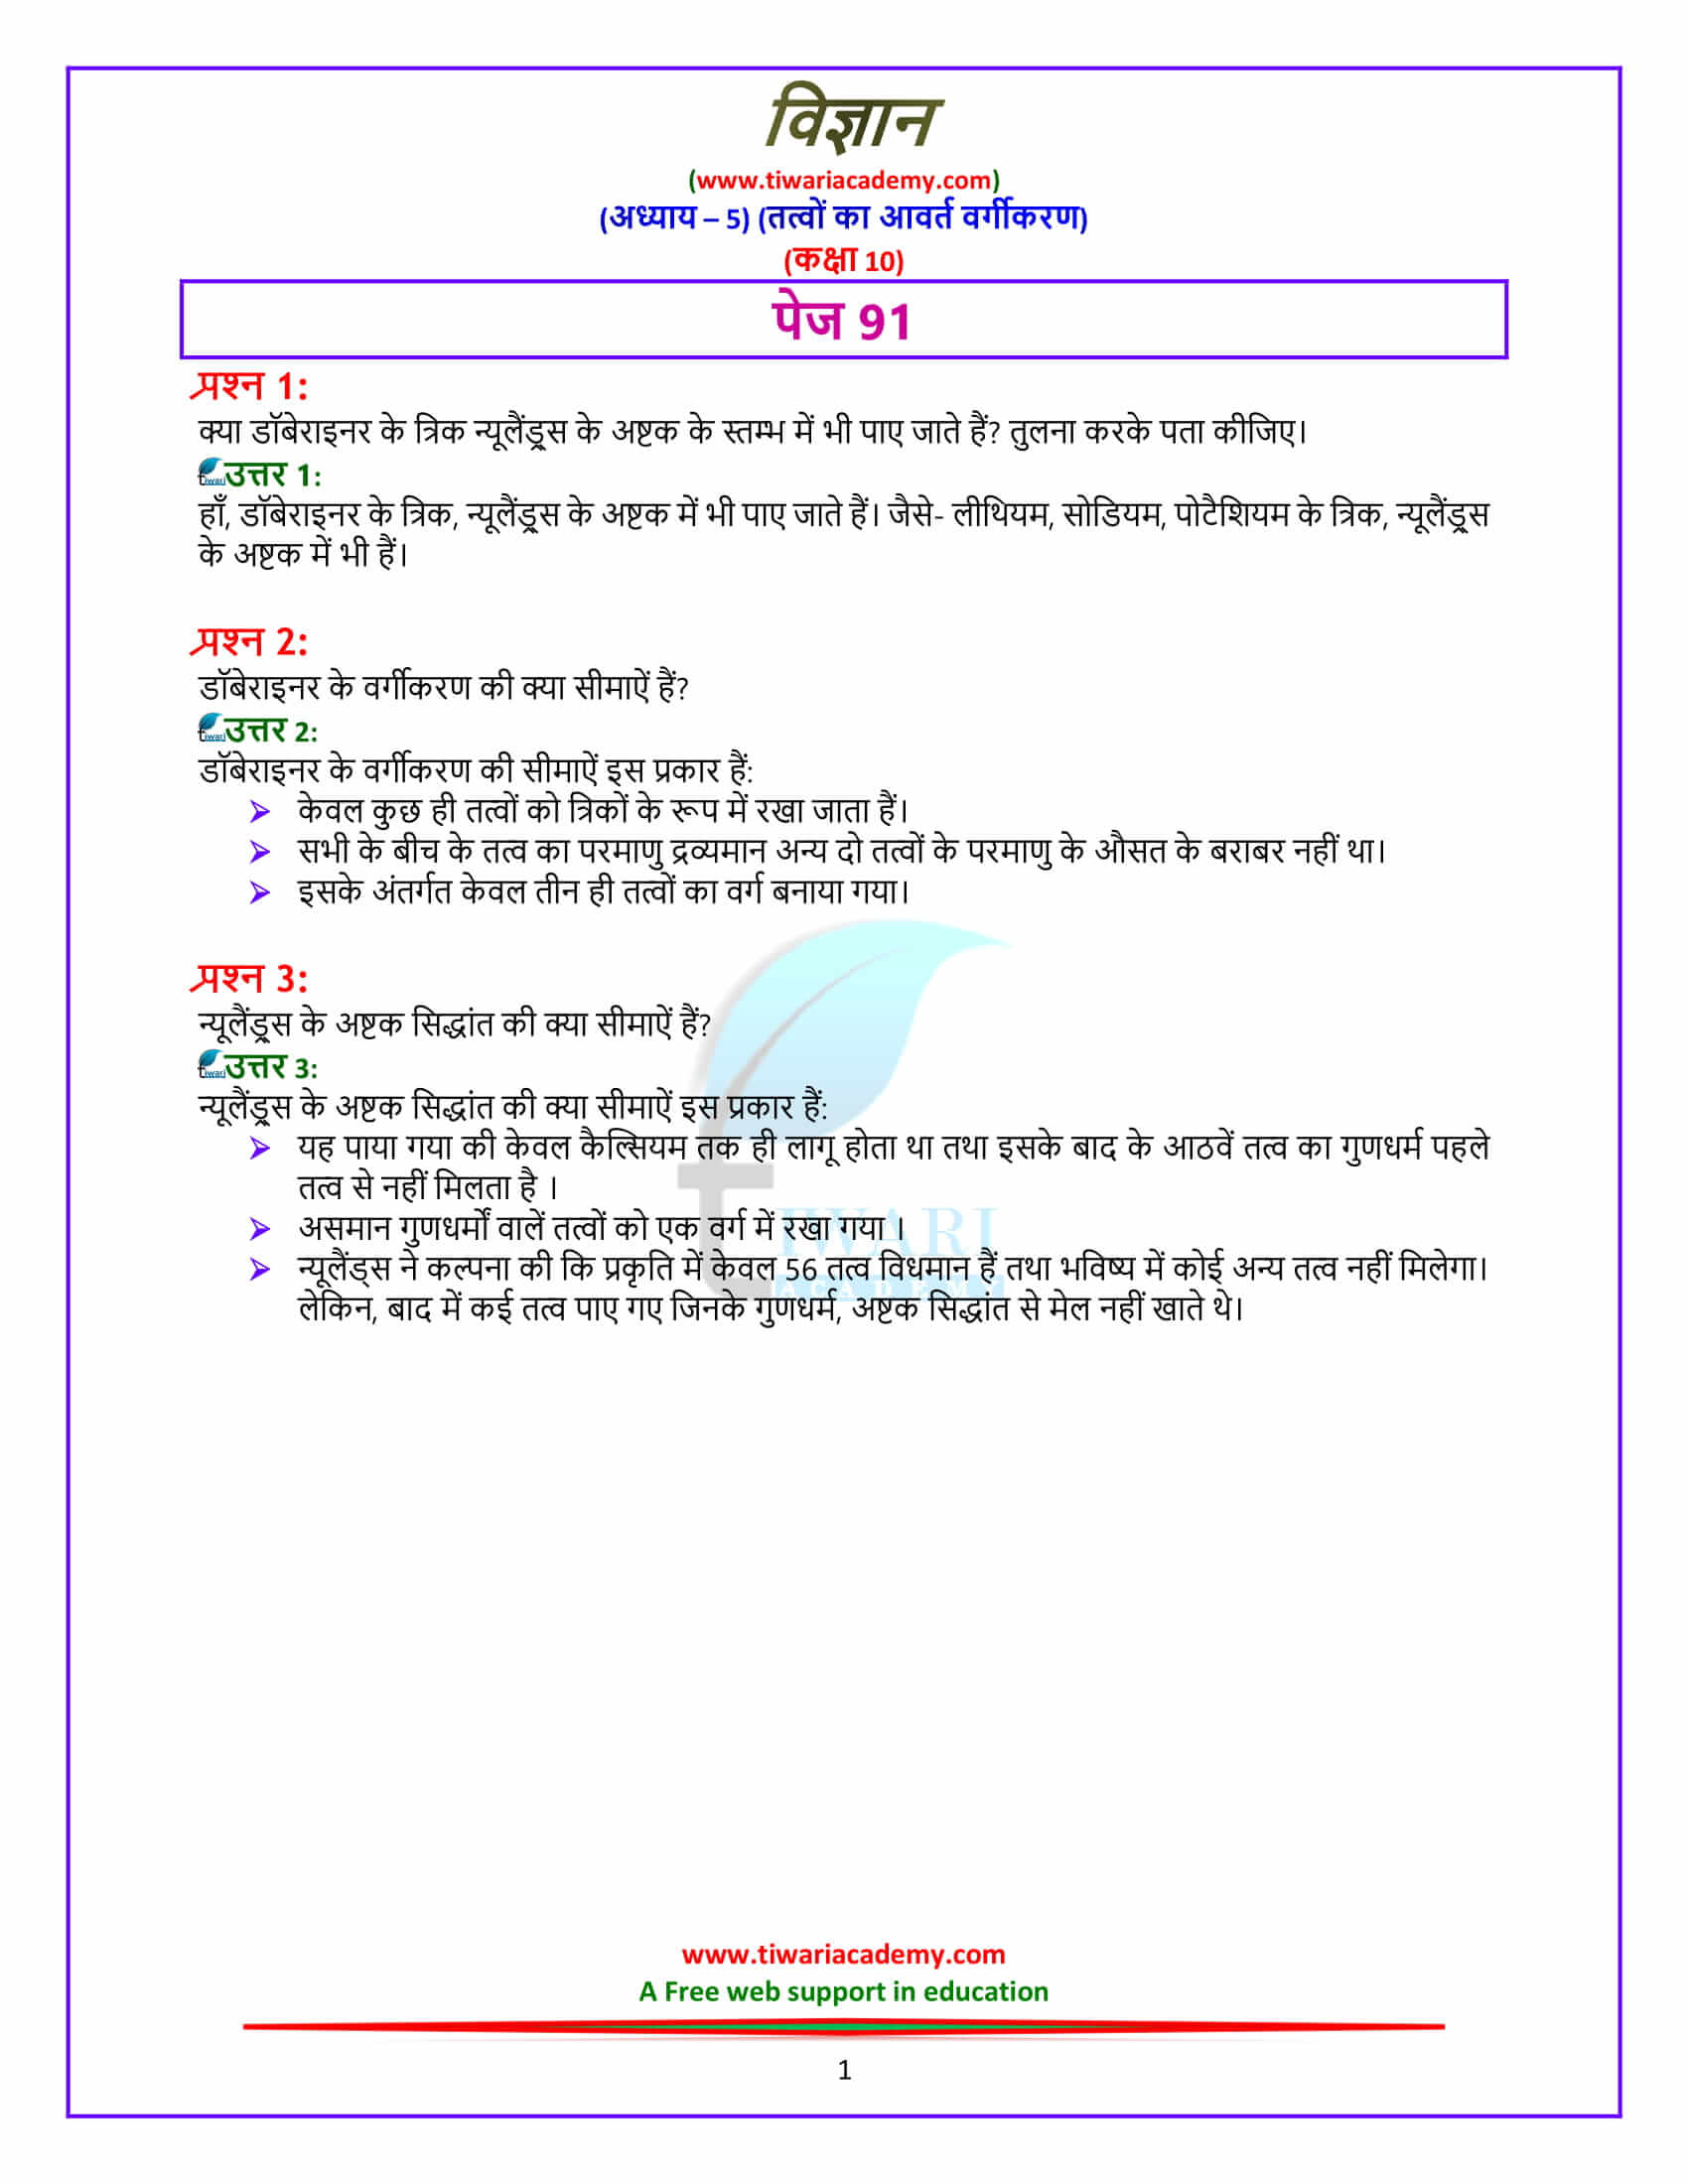 NCERT Solutions for Class 10 Science Chapter 5 Periodic Classification of elements page 91